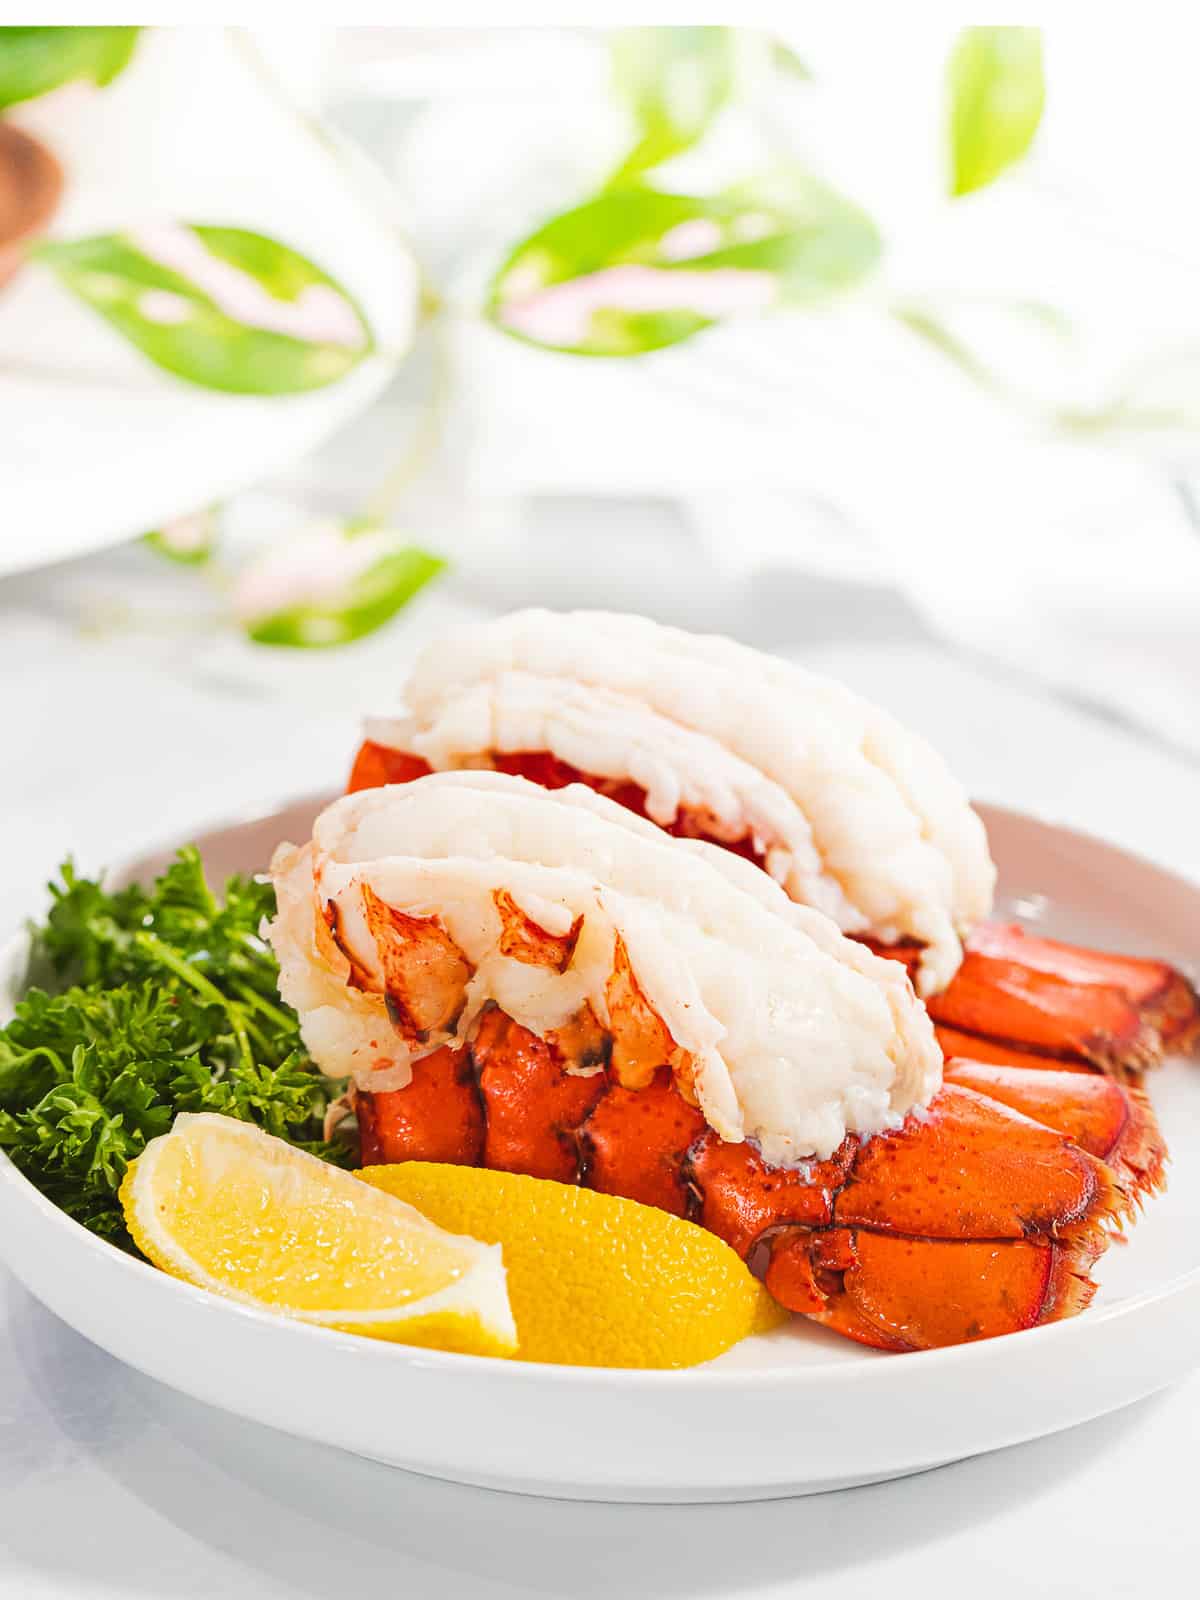 Steamed lobster tails with lemon and parsley on a plate.